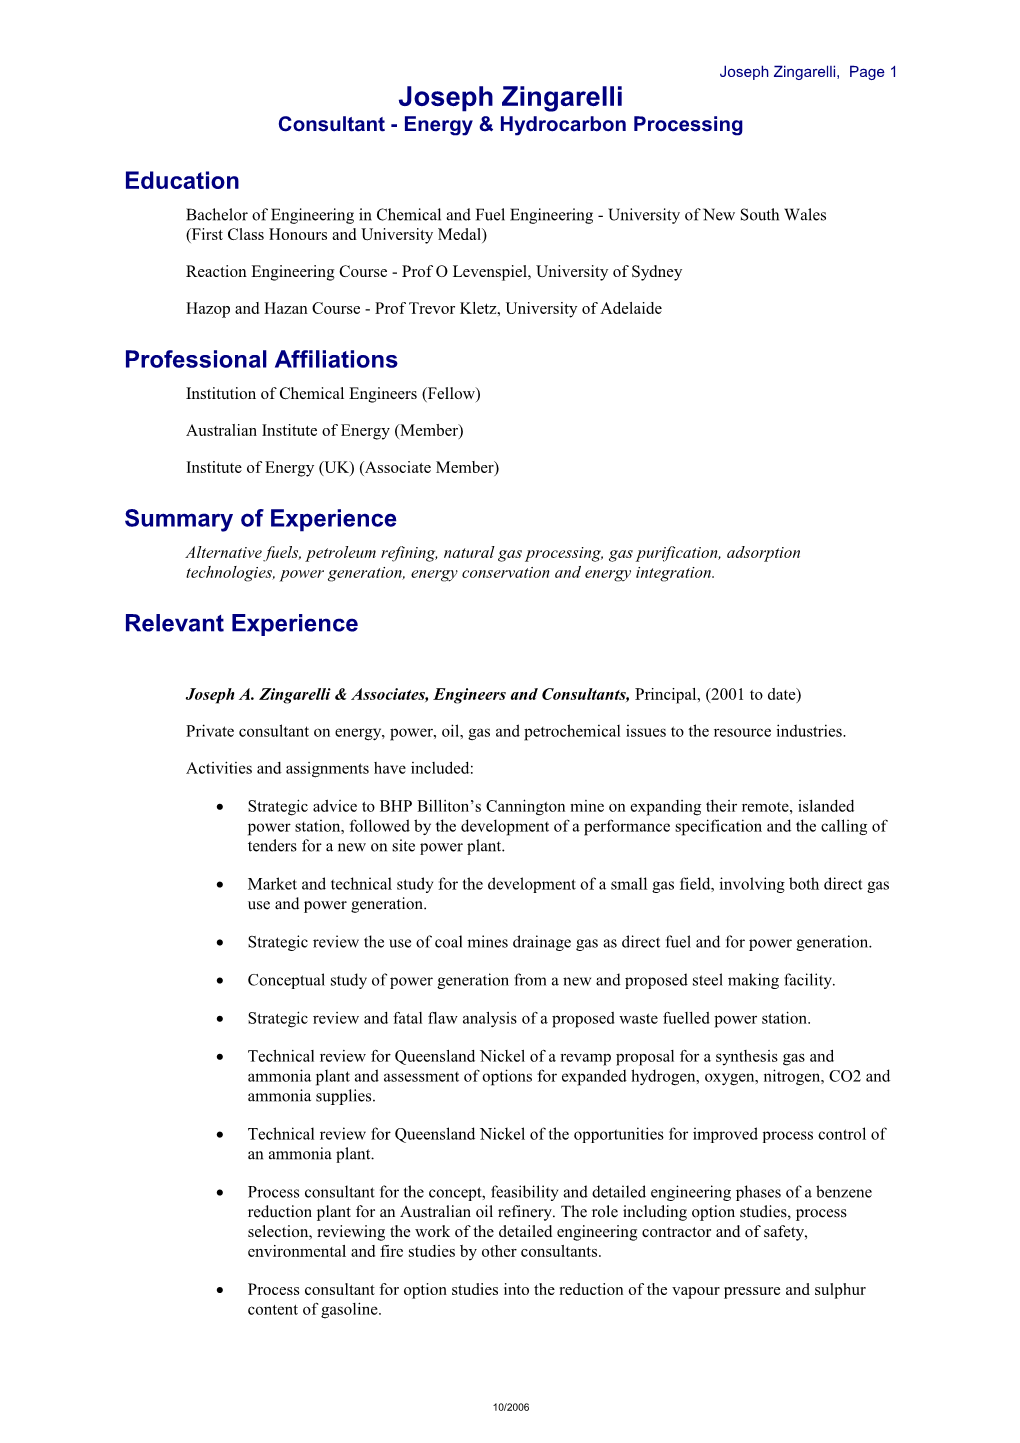 Resume - Suitable for Both B/W and Colour